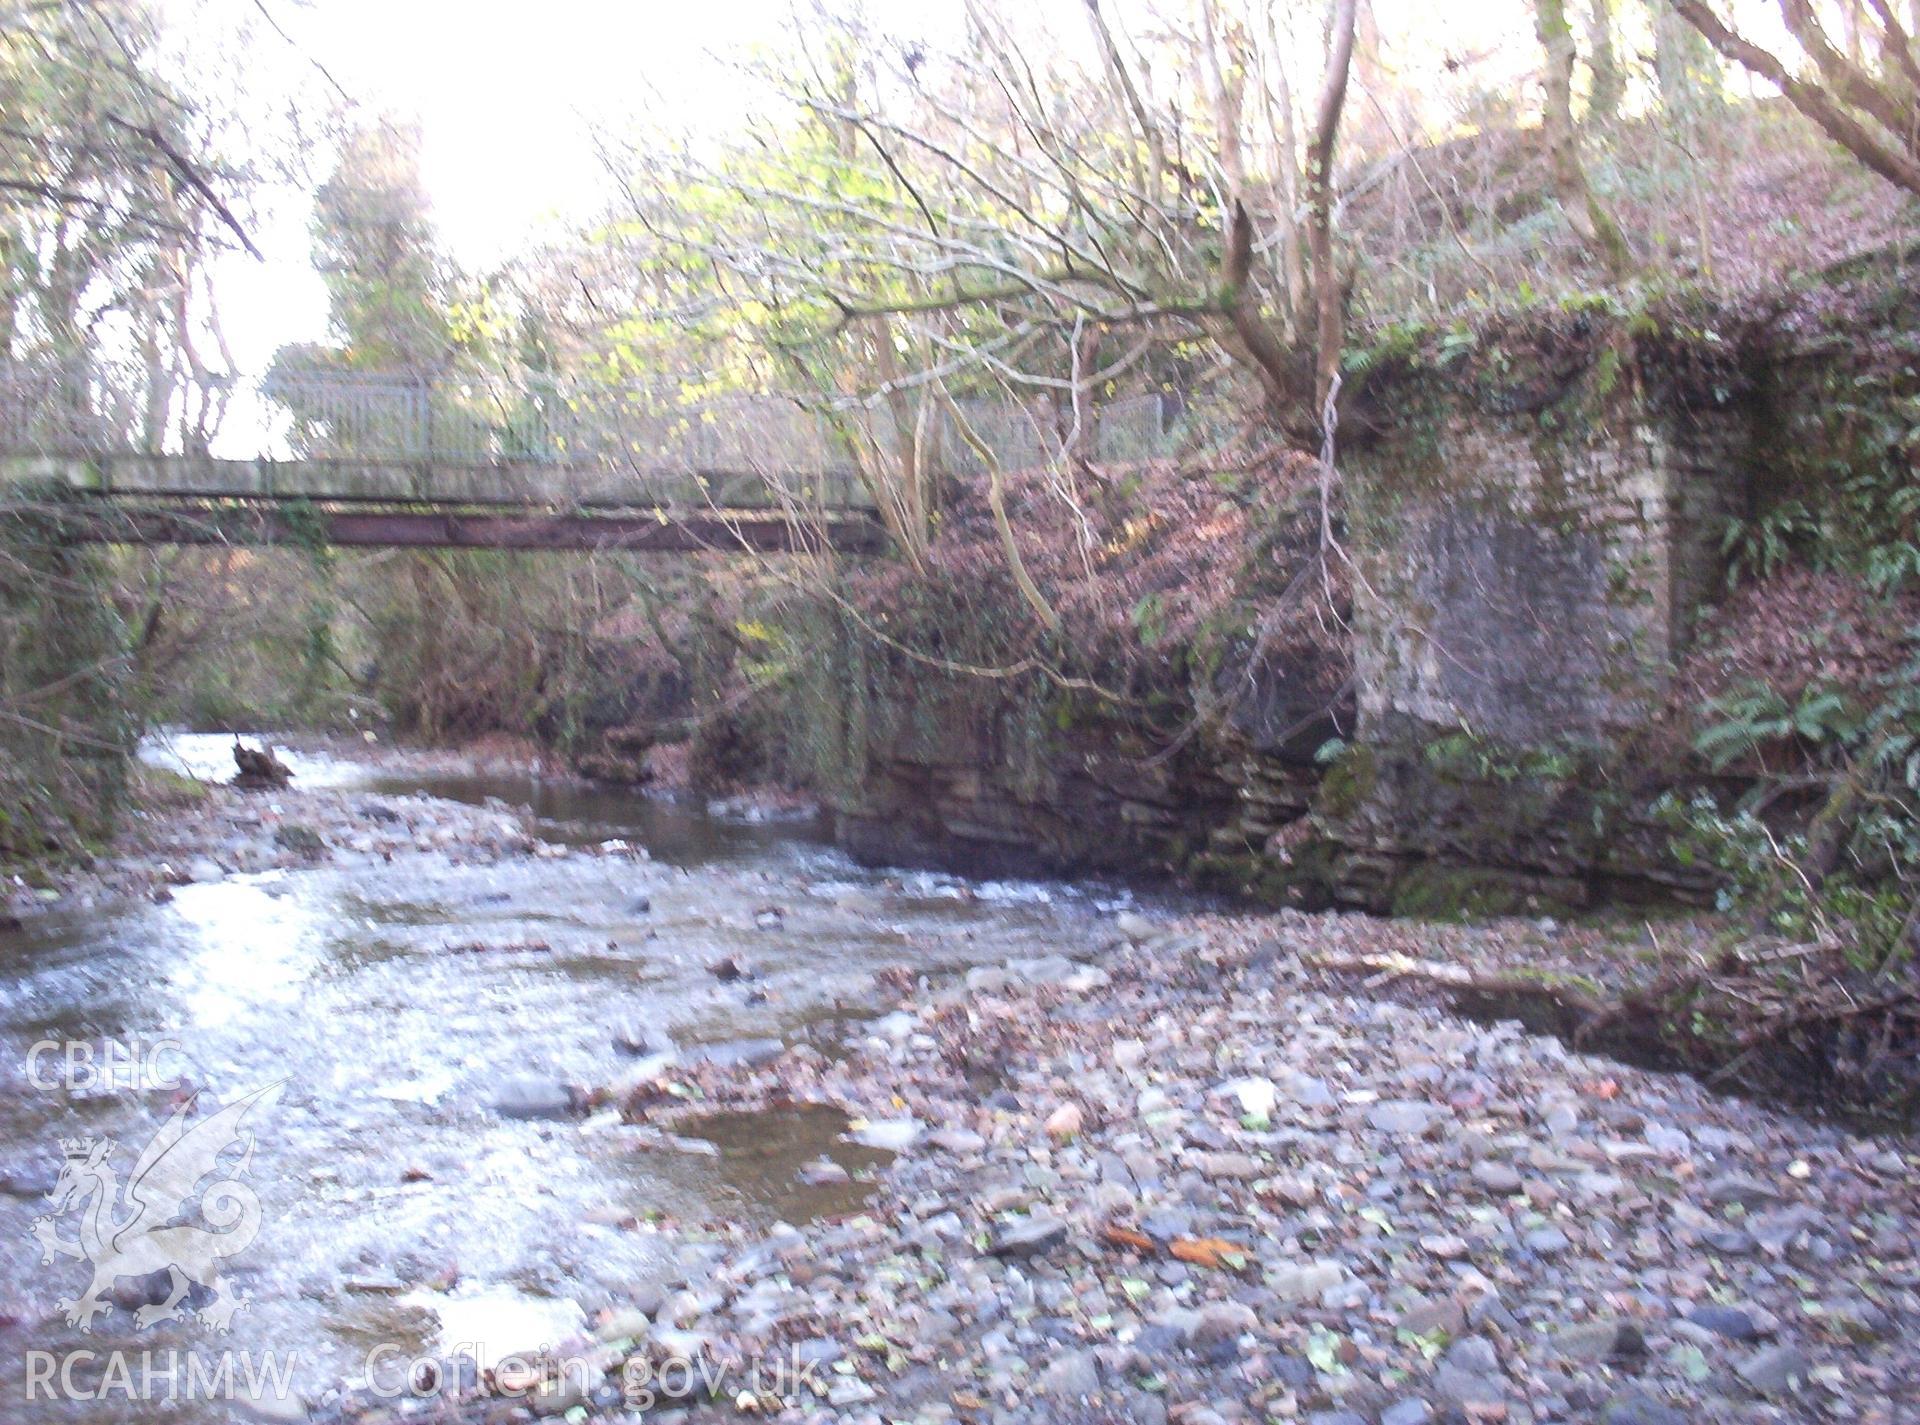 Looking downstream (south-east) from culvert mouth (on right corner of photo) with abutment of railway bridge on right beyond.